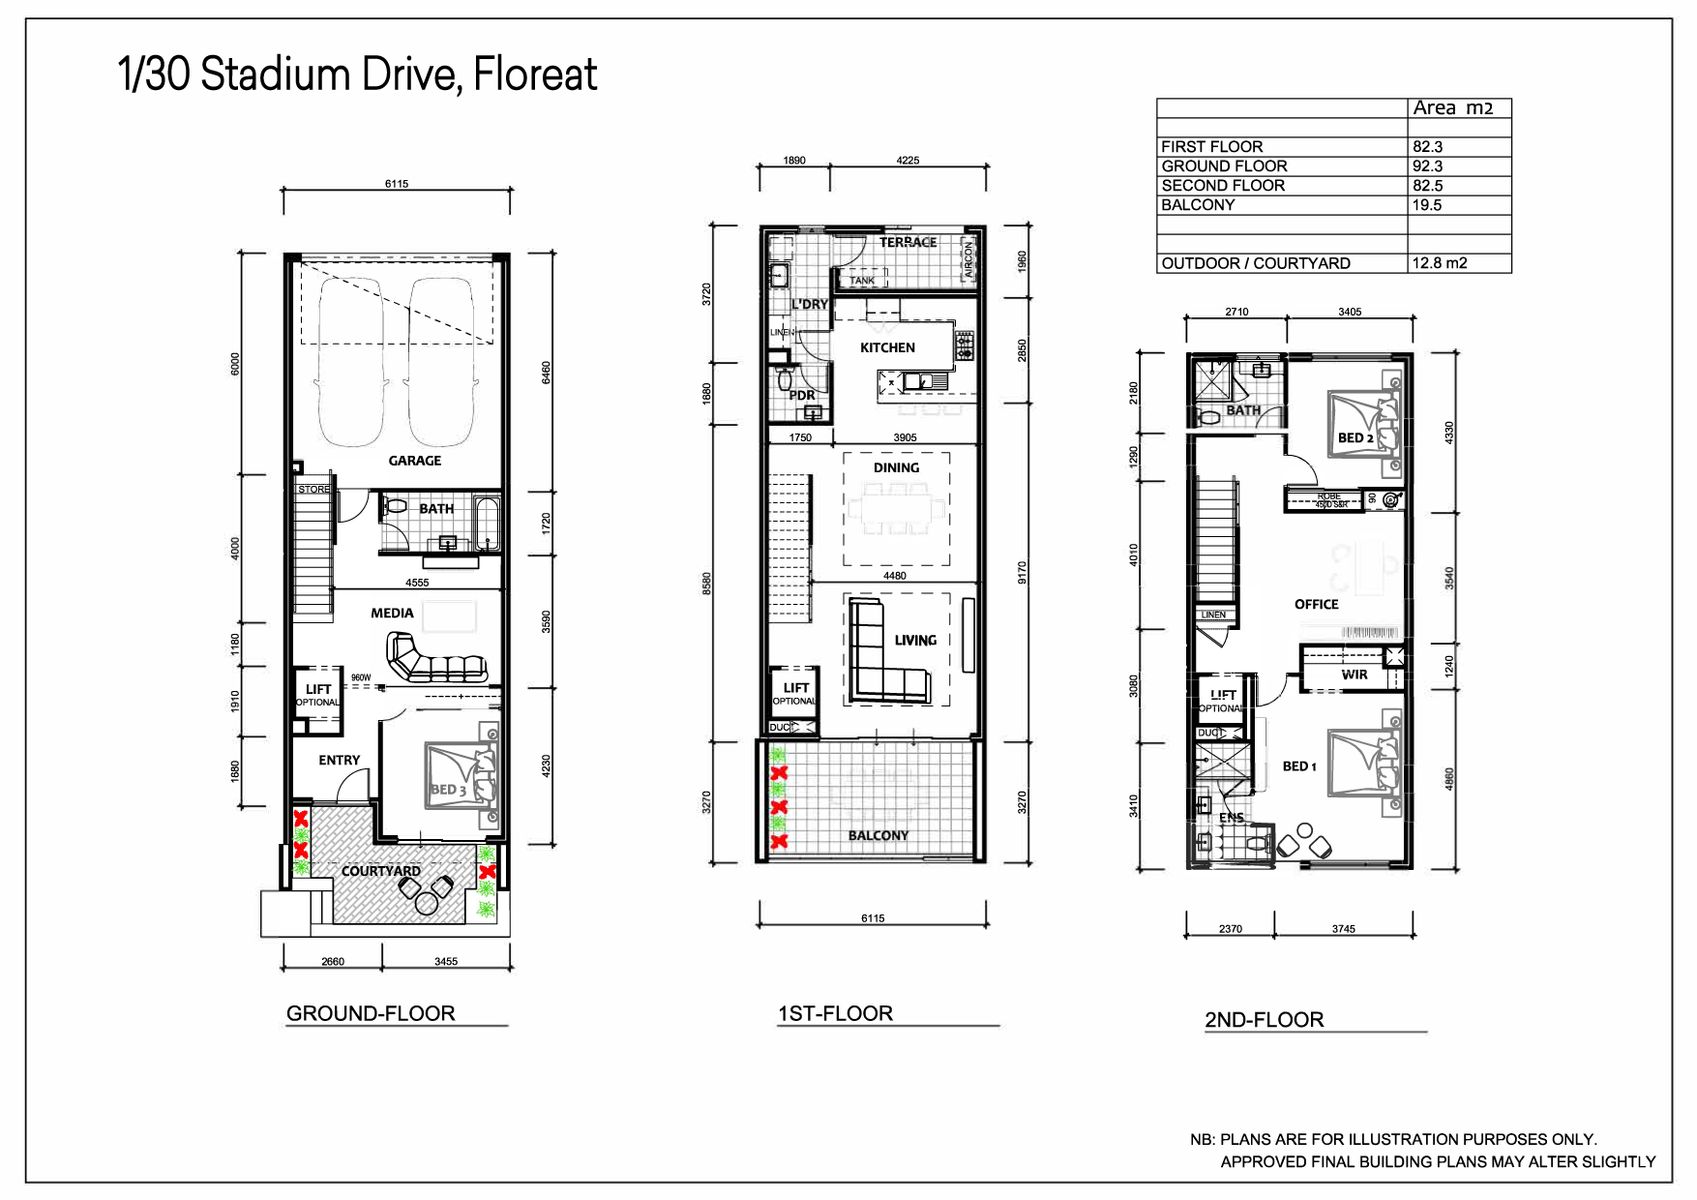 Floorplan with address and no total sqm